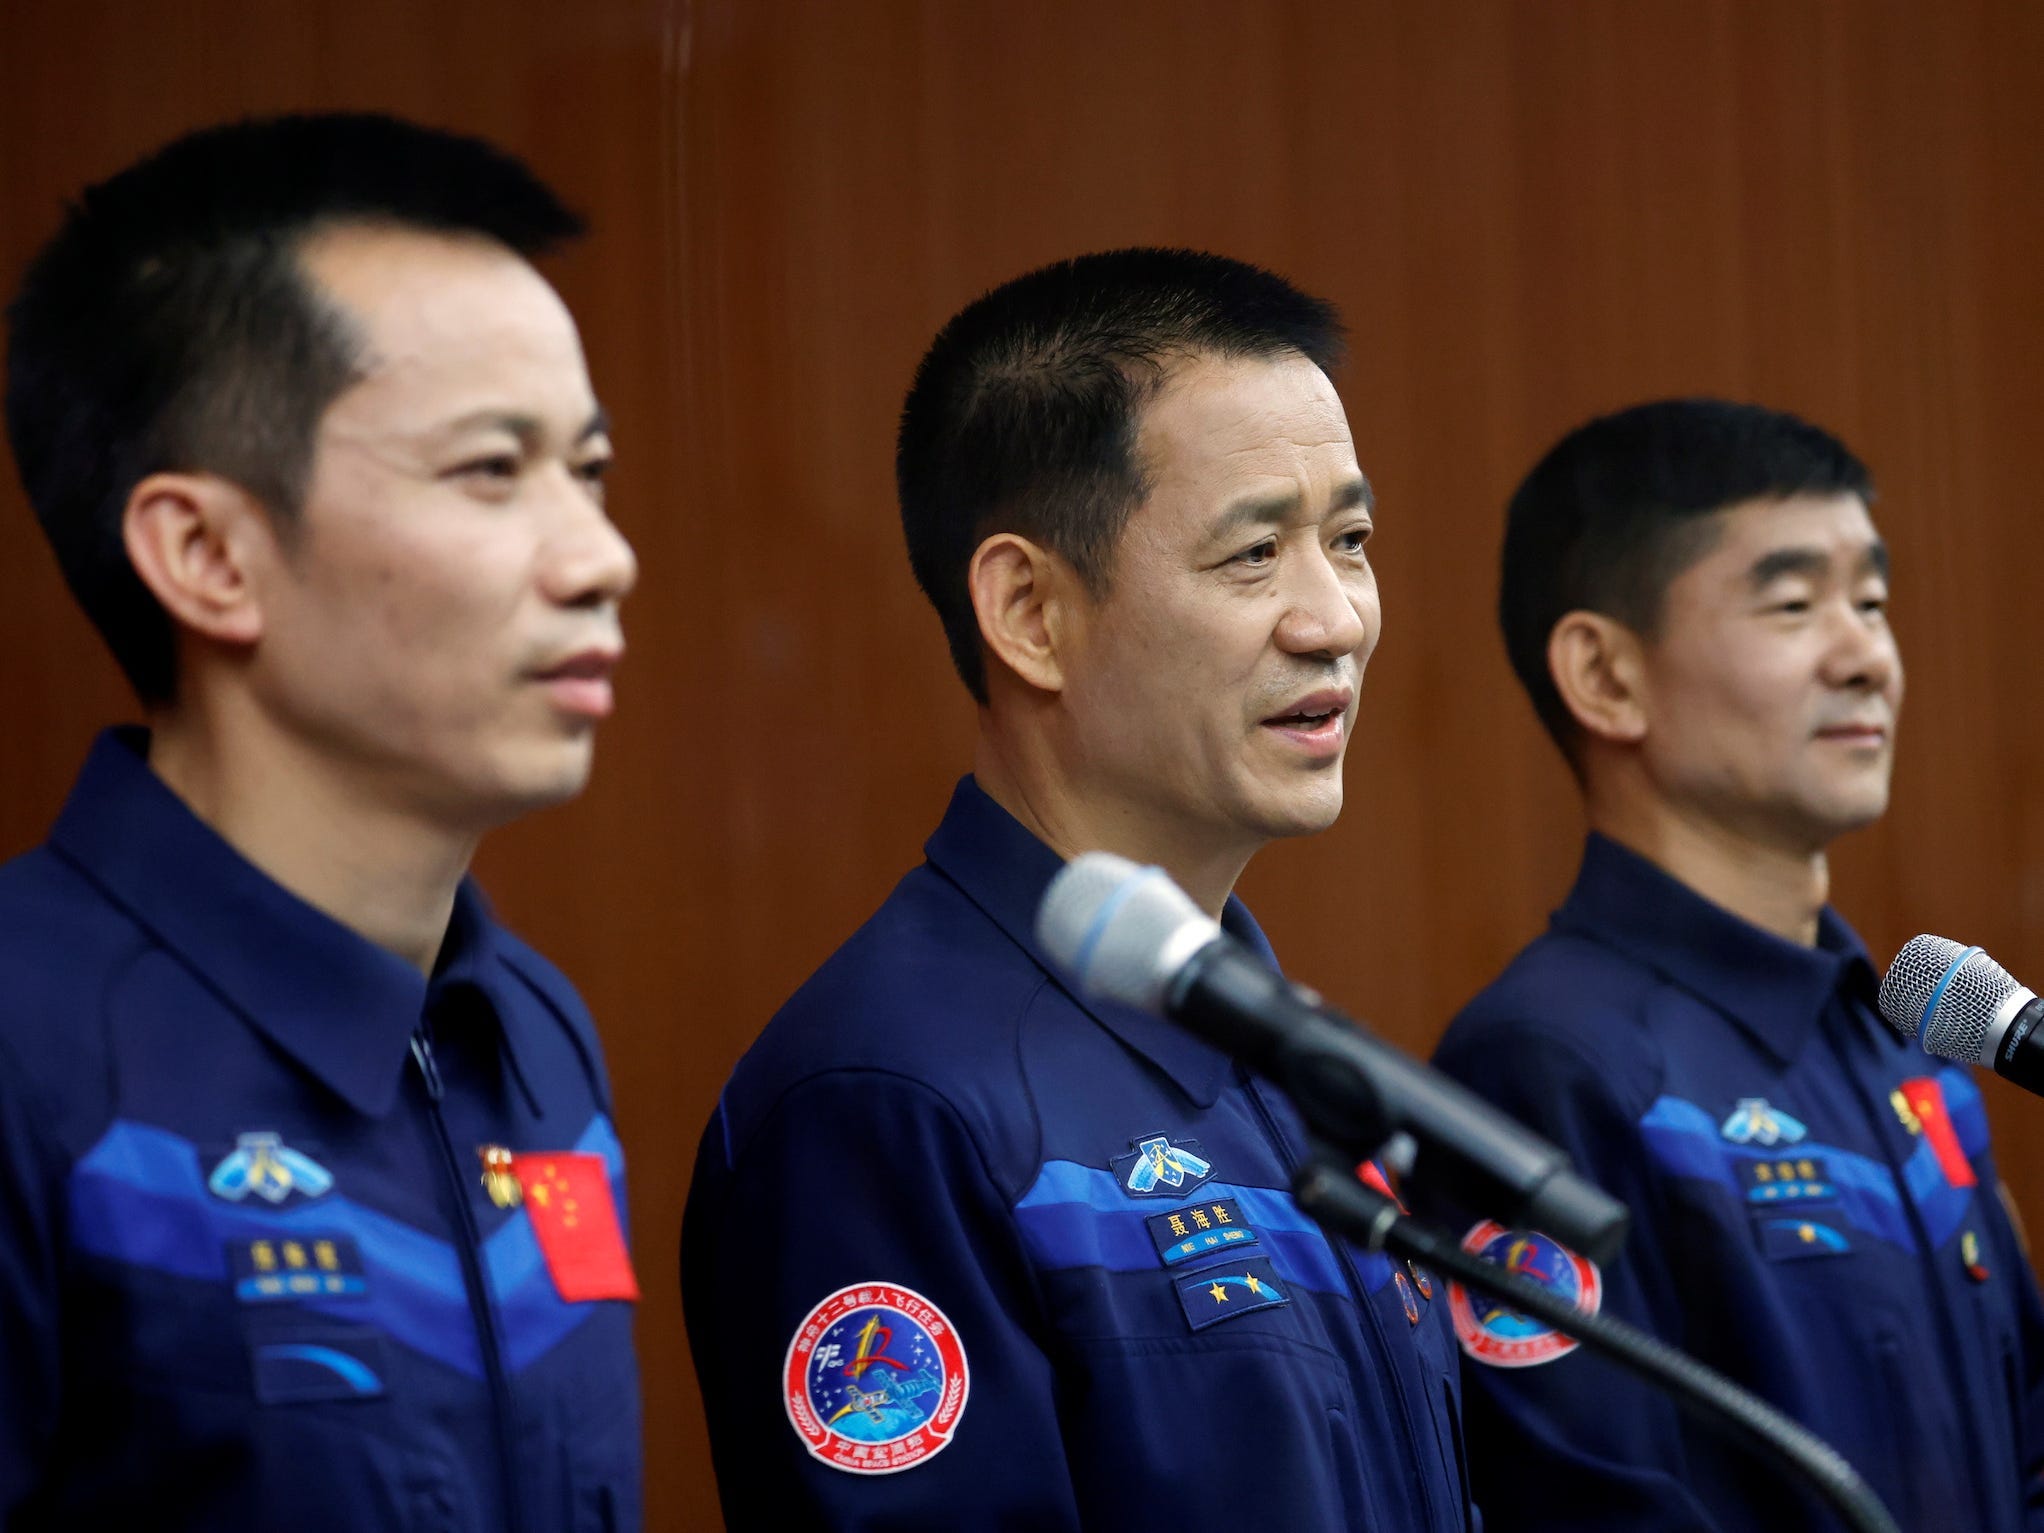 chinese taikonauts Nie Haisheng Liu Boming and Tang Hongbo stand at microphones during a press conference